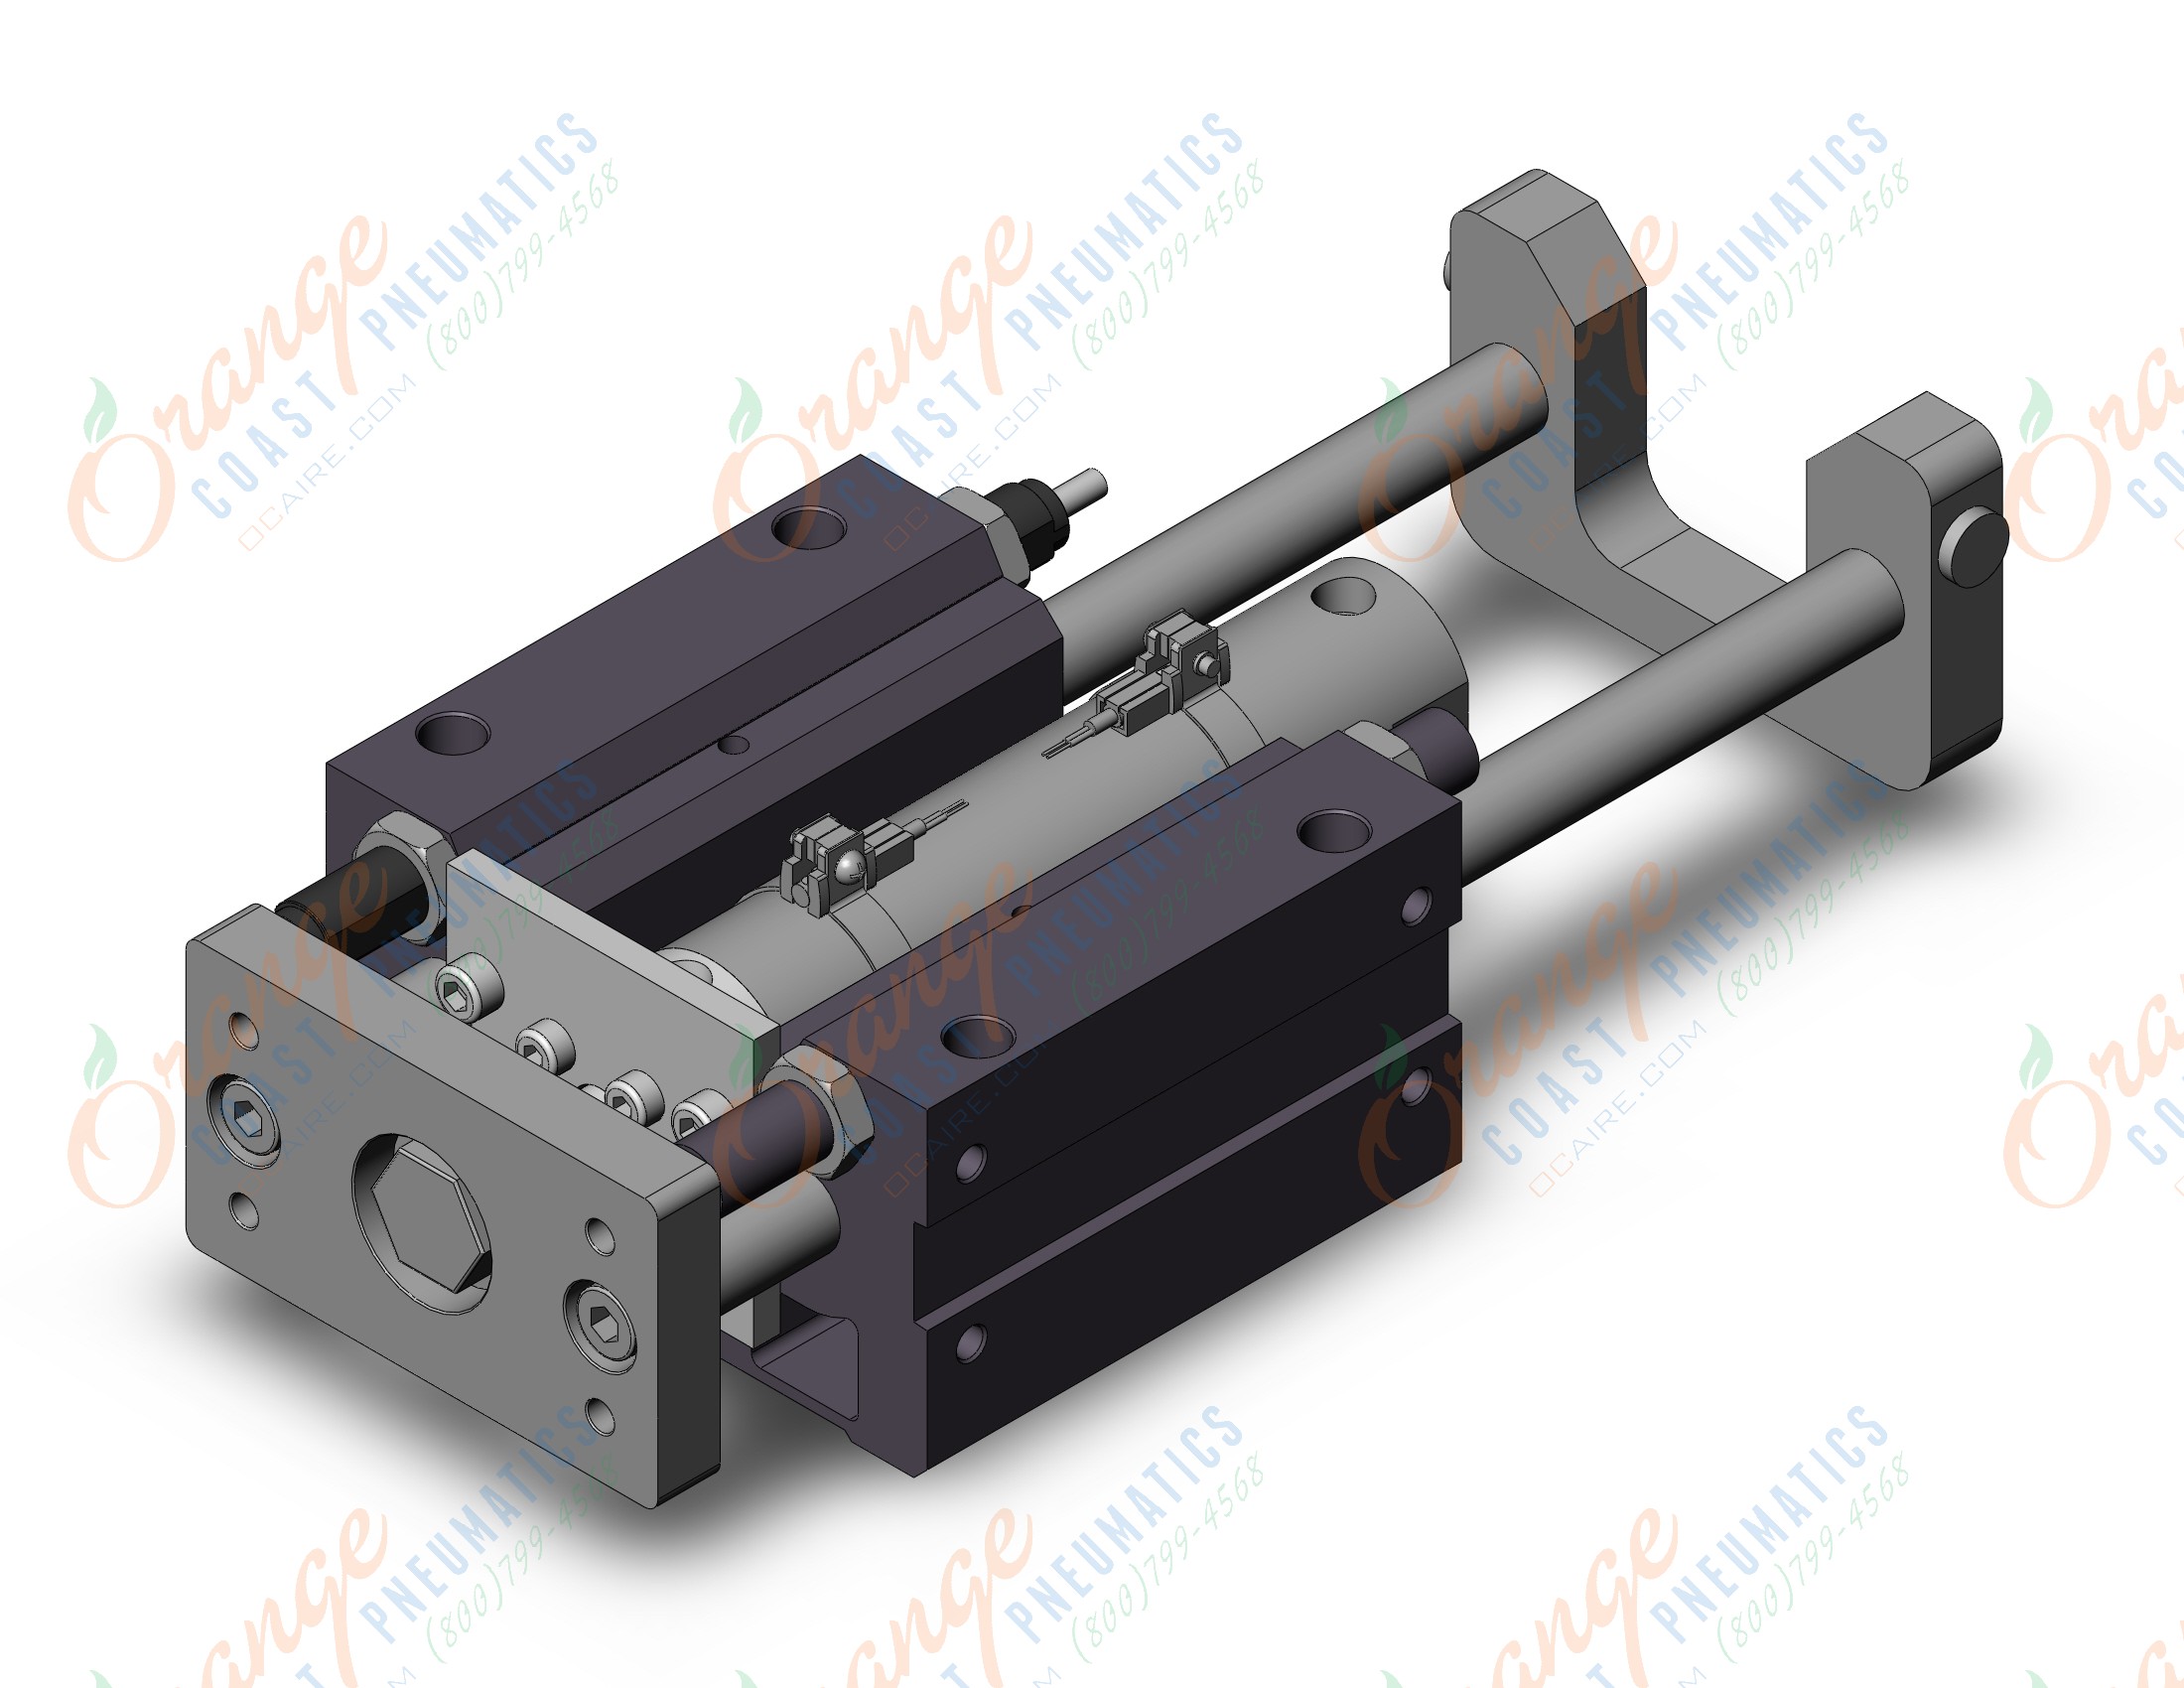 SMC MGGLB32TN-100-A93 mgg, guide cylinder, GUIDED CYLINDER